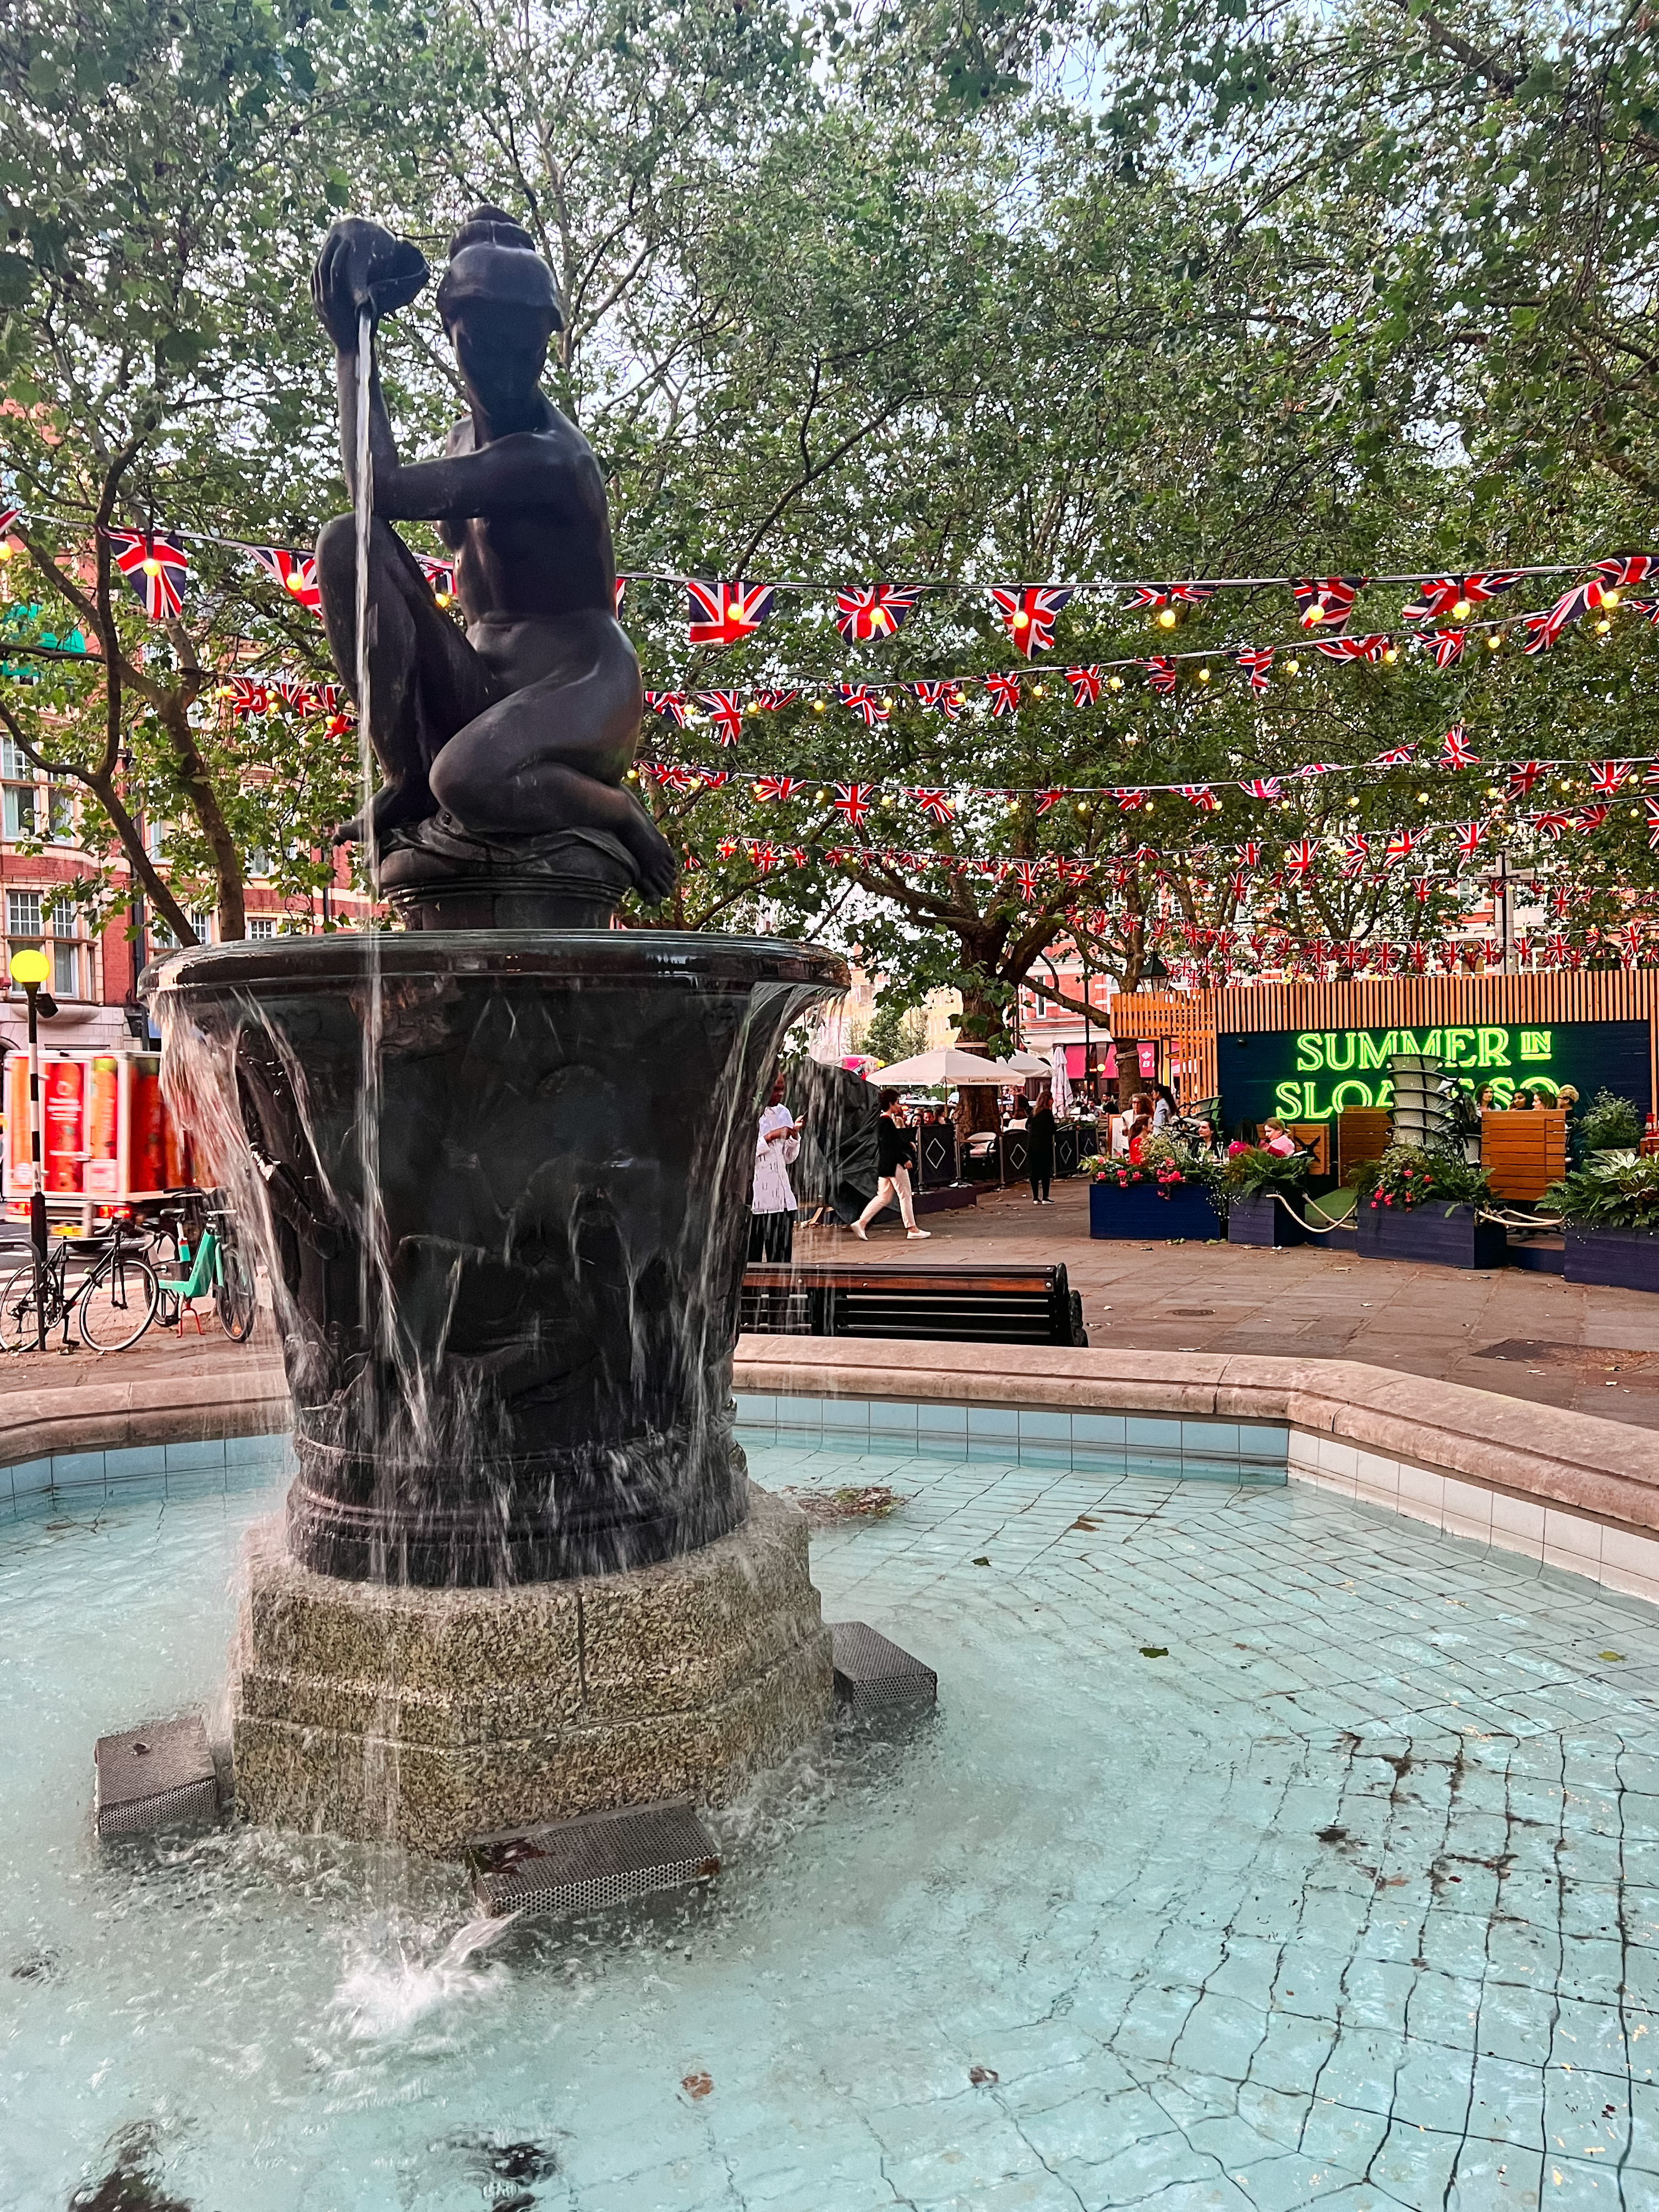 Discover things to do in Sloane Square